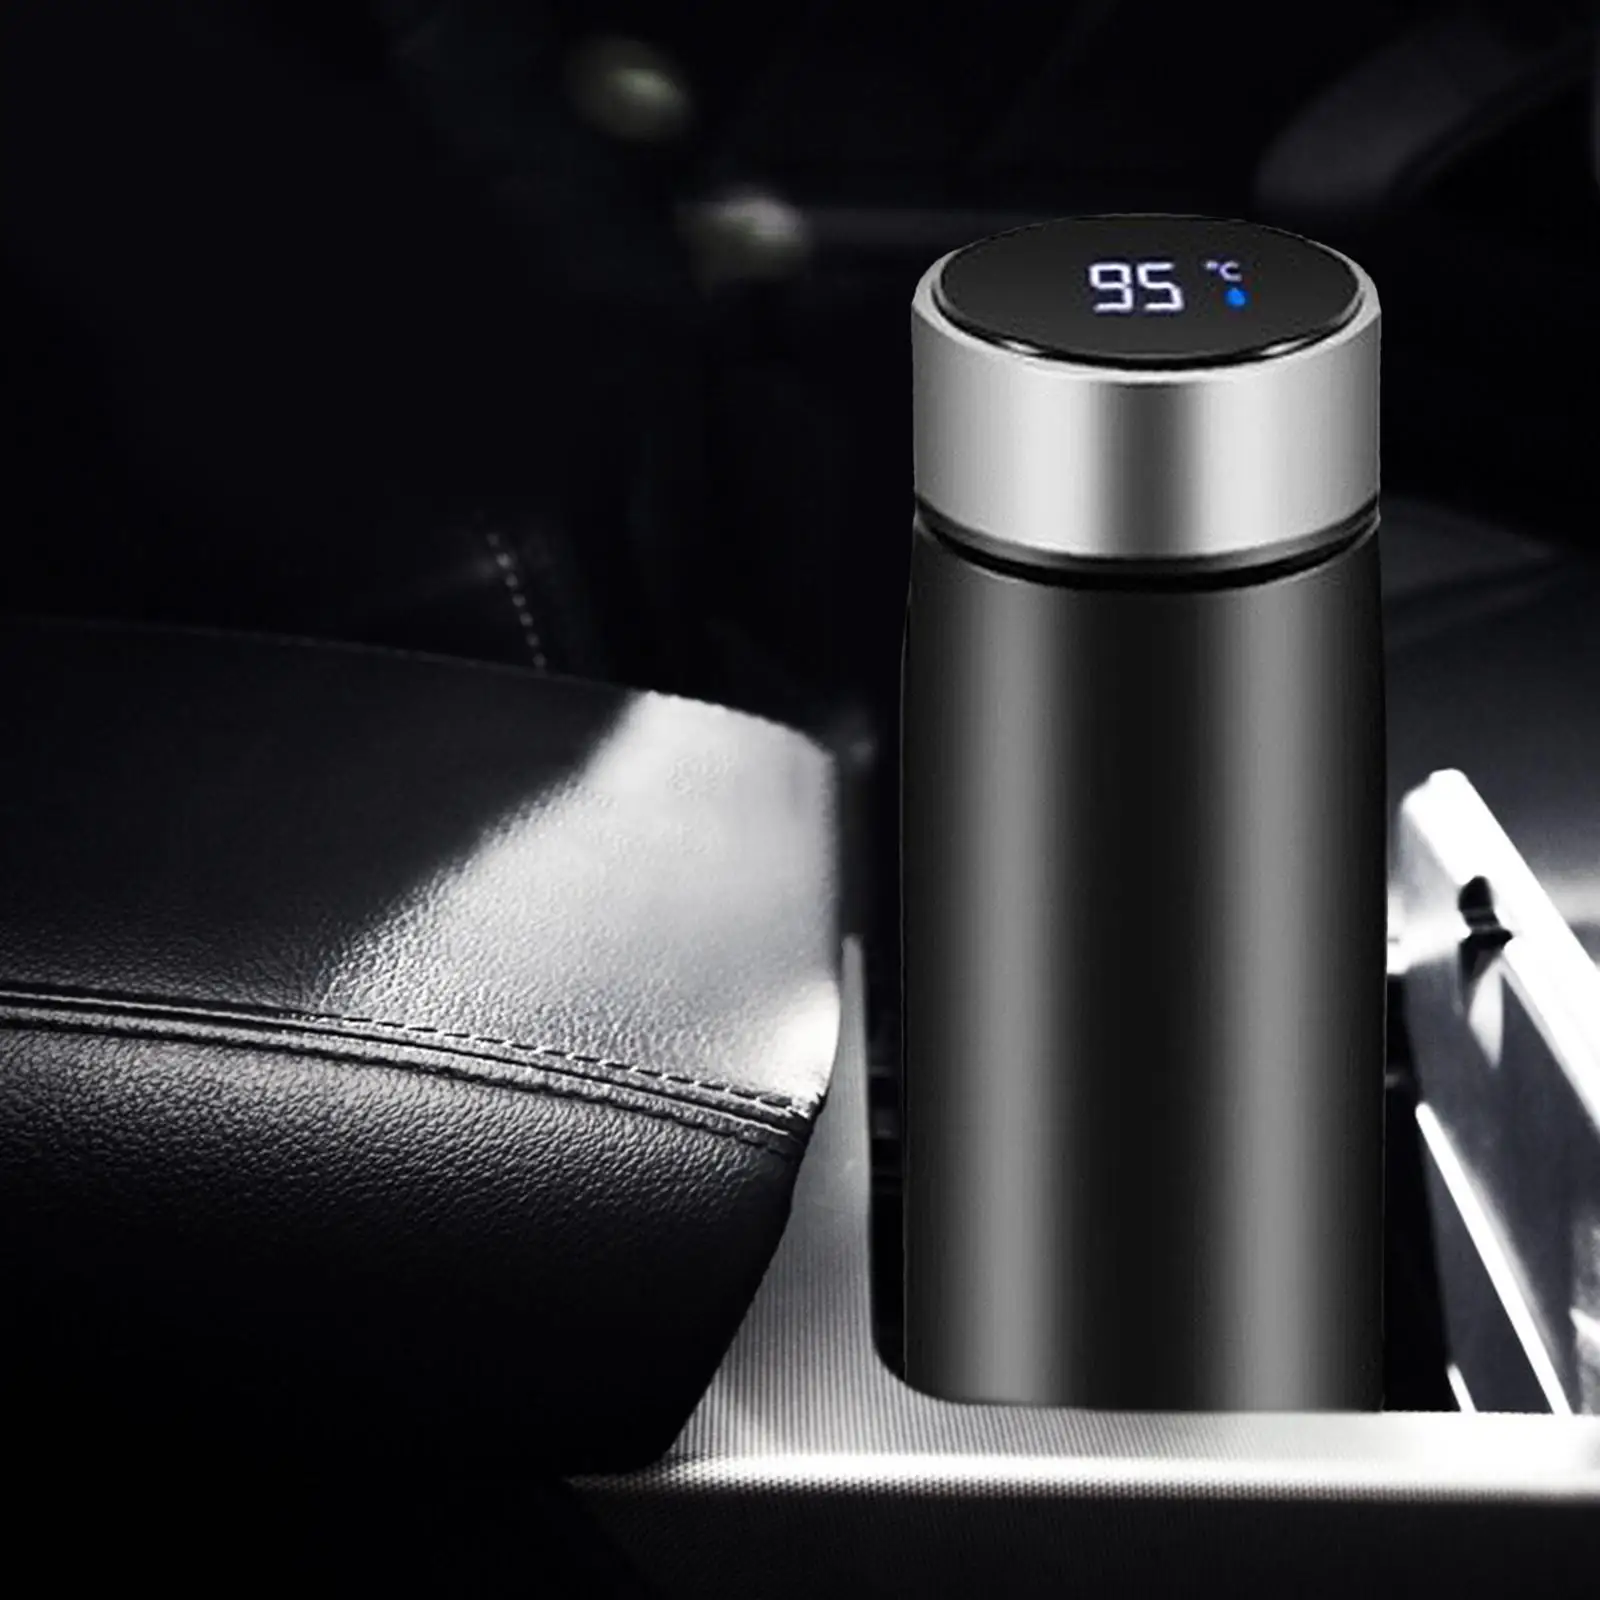 12V 24V Car Heating Cup Smart Car Bottle Warmer LCD Display Insulated Cup Heater Electric Heated Travel Mug for Keep Warm Travel